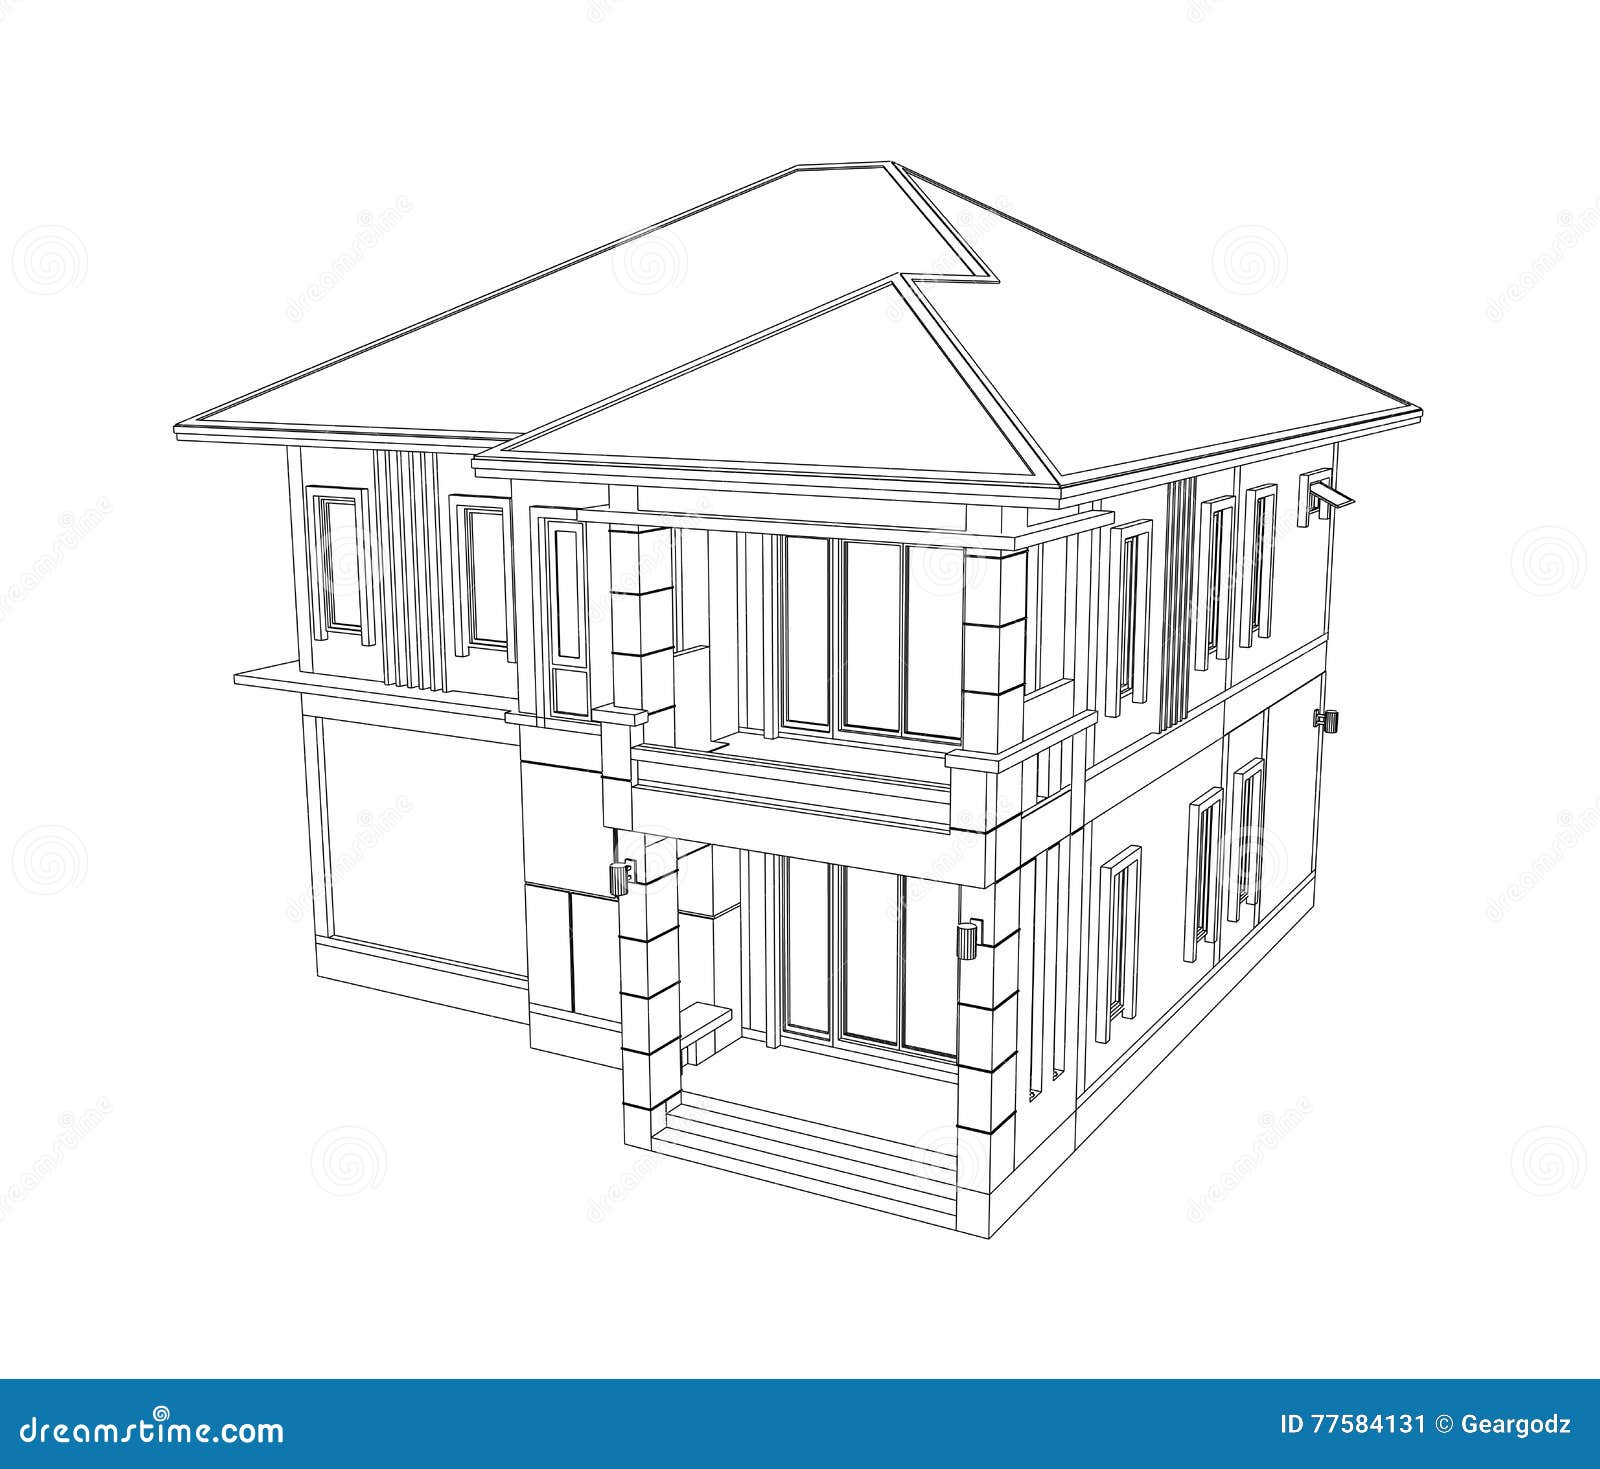 3D Home Drawing Design Stock Photo Picture And Royalty Free Image Image  48100705